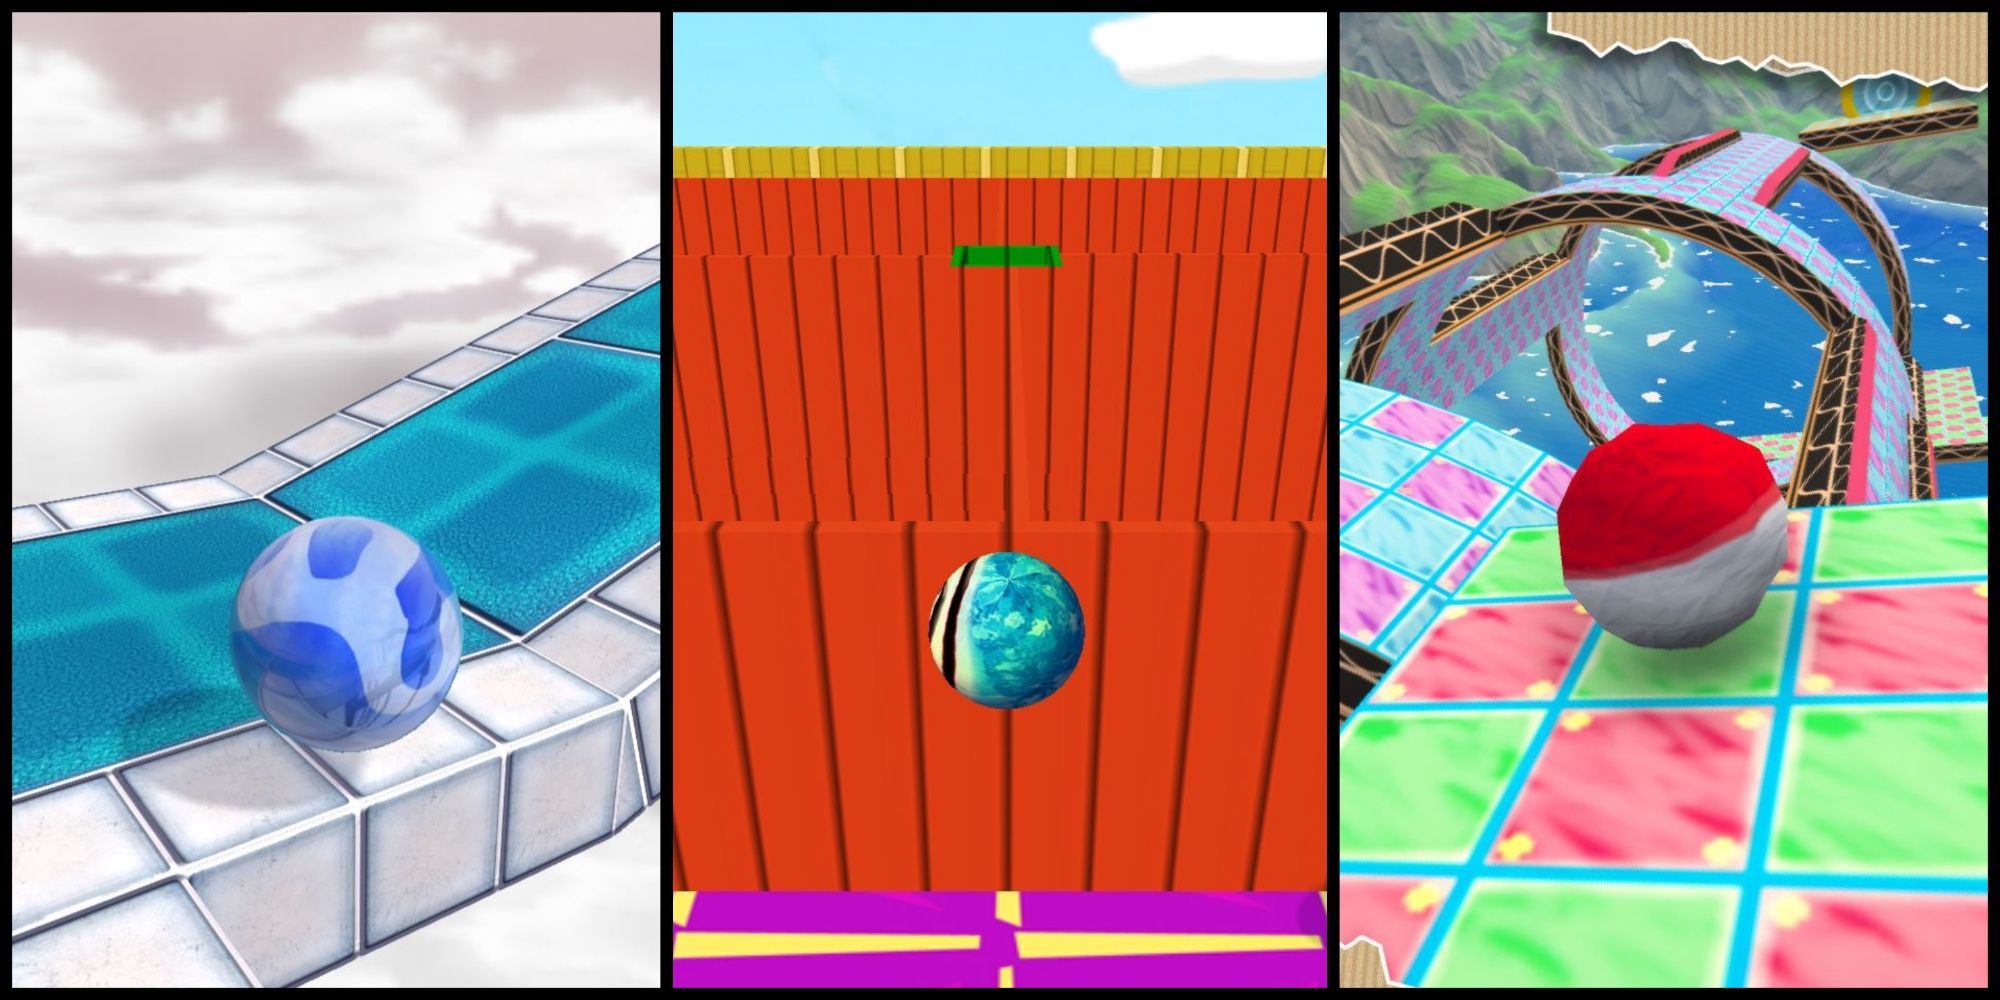 Screenshots from Marble Blast Ultra, Marble Blast Gold, and Paperball